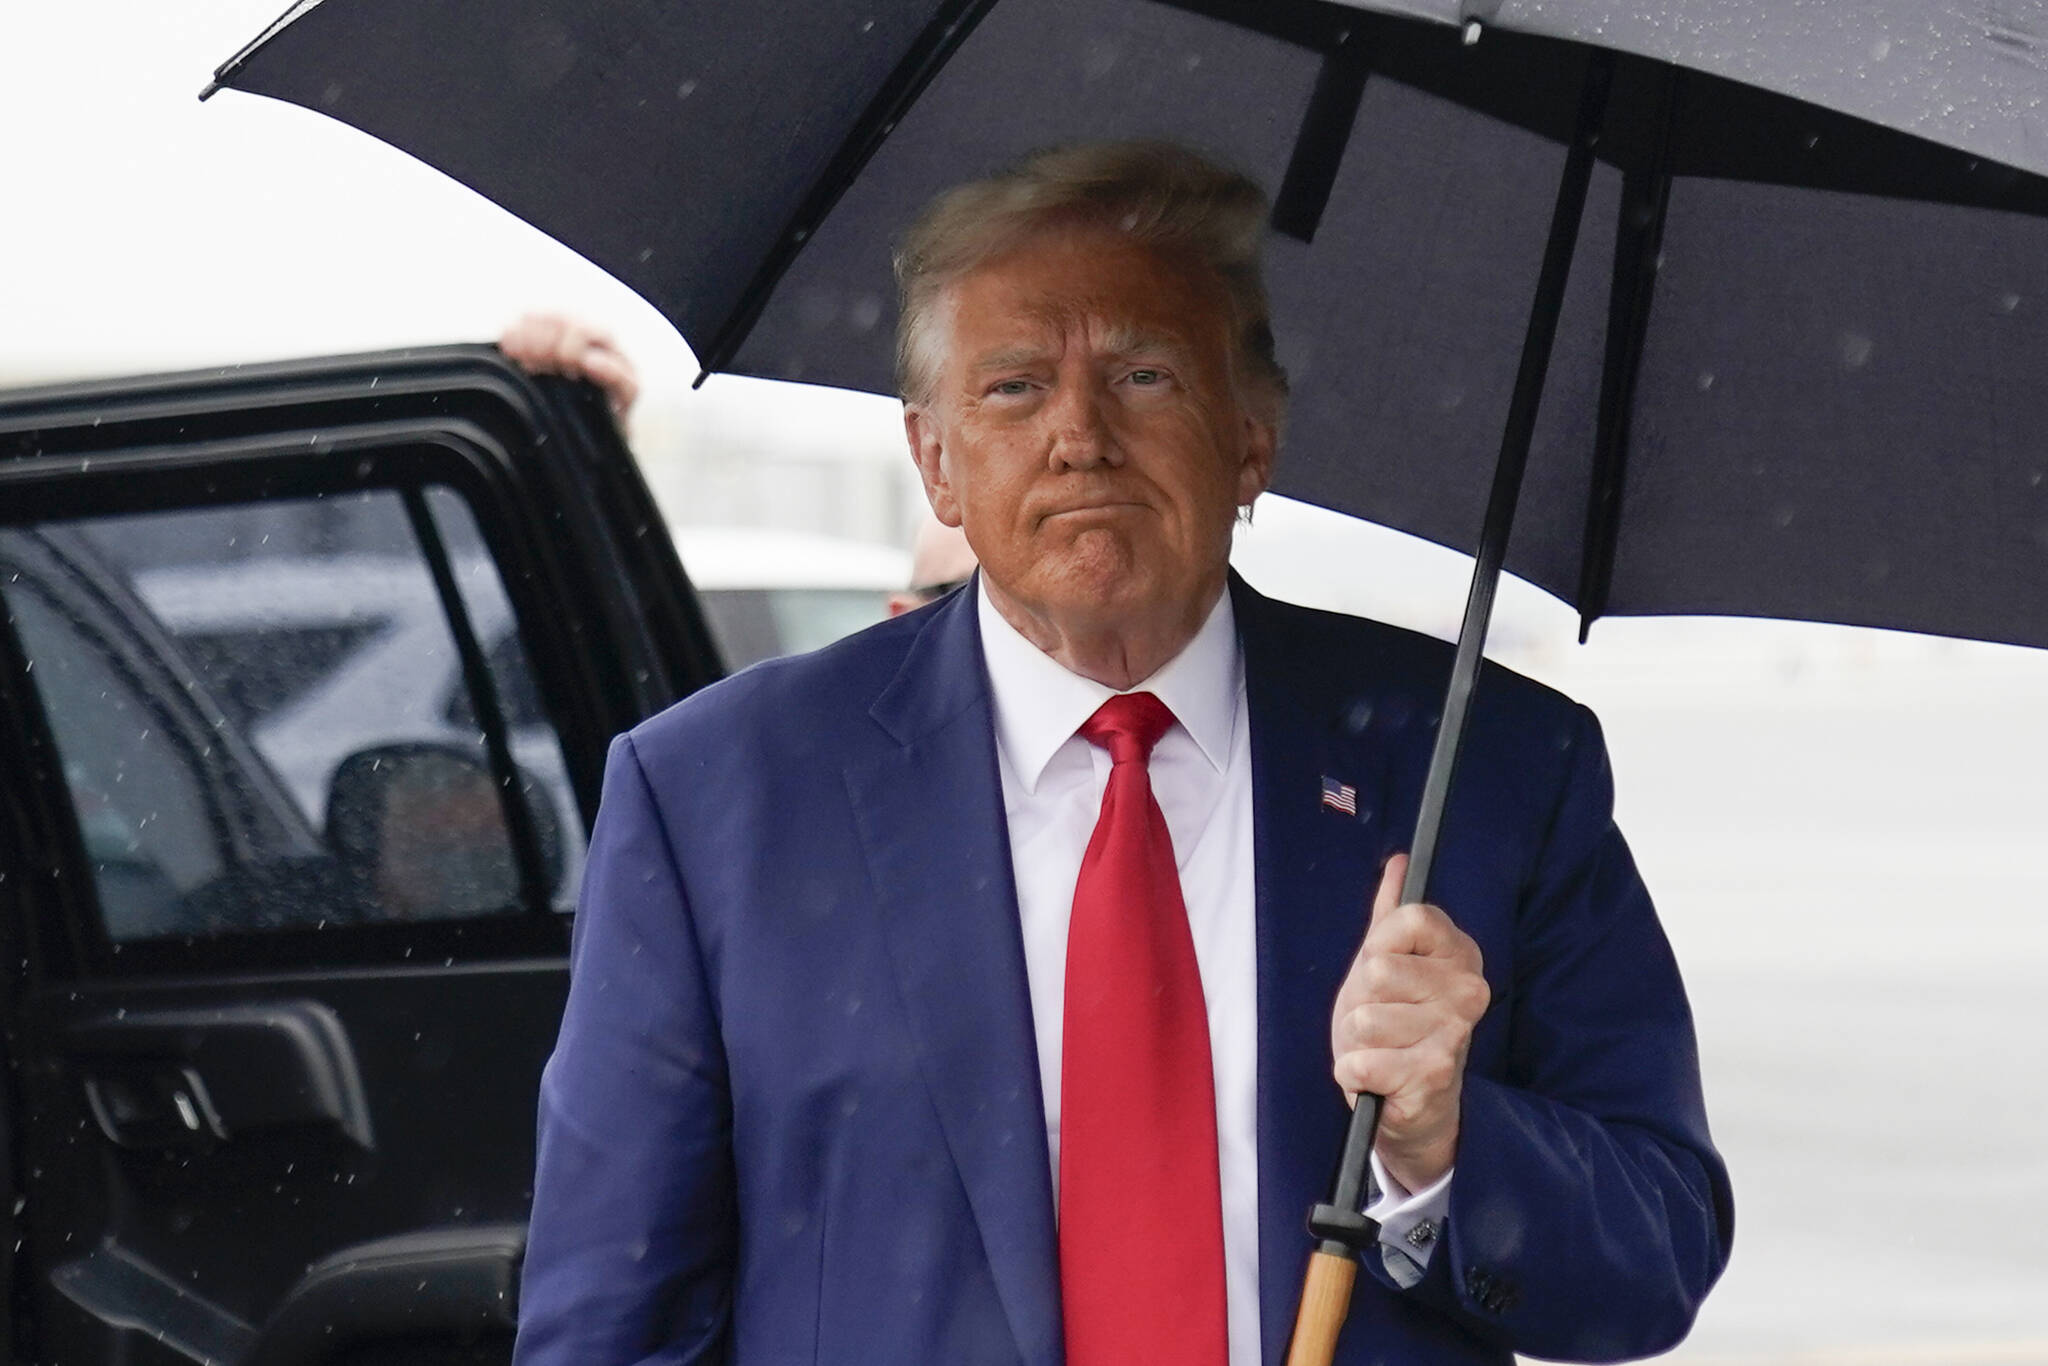 Former President Donald Trump walks over to speak with reporters before he boards his plane at Ronald Reagan Washington National Airport on Aug. 3 in Arlington, Va., after facing a judge on federal conspiracy charges that allege he conspired to subvert the 2020 election. (AP Photo/Alex Brandon)